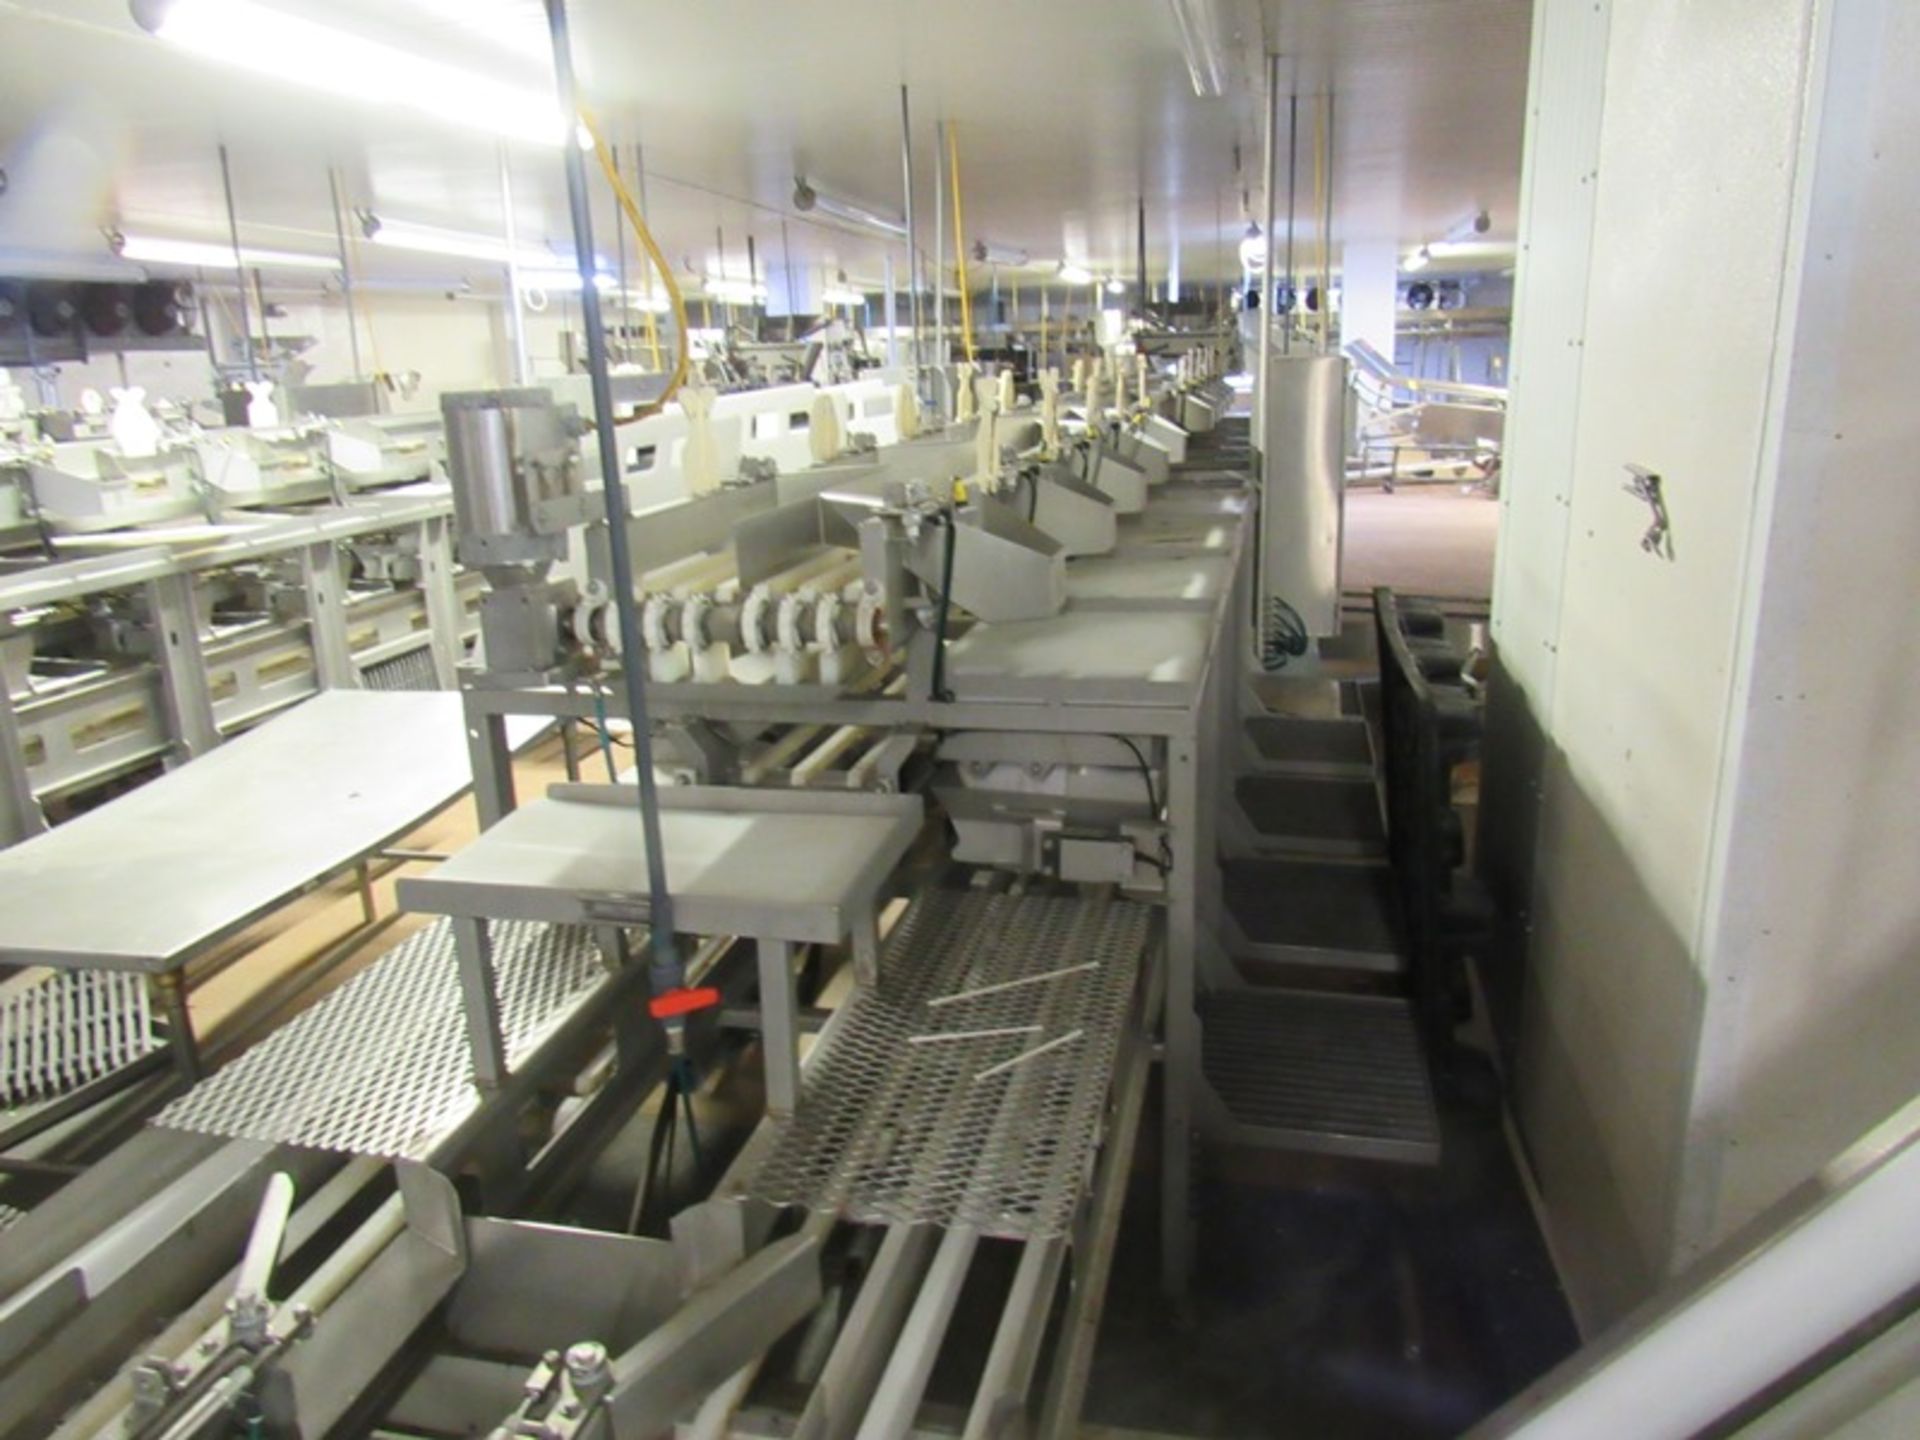 C.A.T. Stainless Steel Grading Line, dual lanes, 10 positions per lane, pneumatic drop chutes, - Image 10 of 22